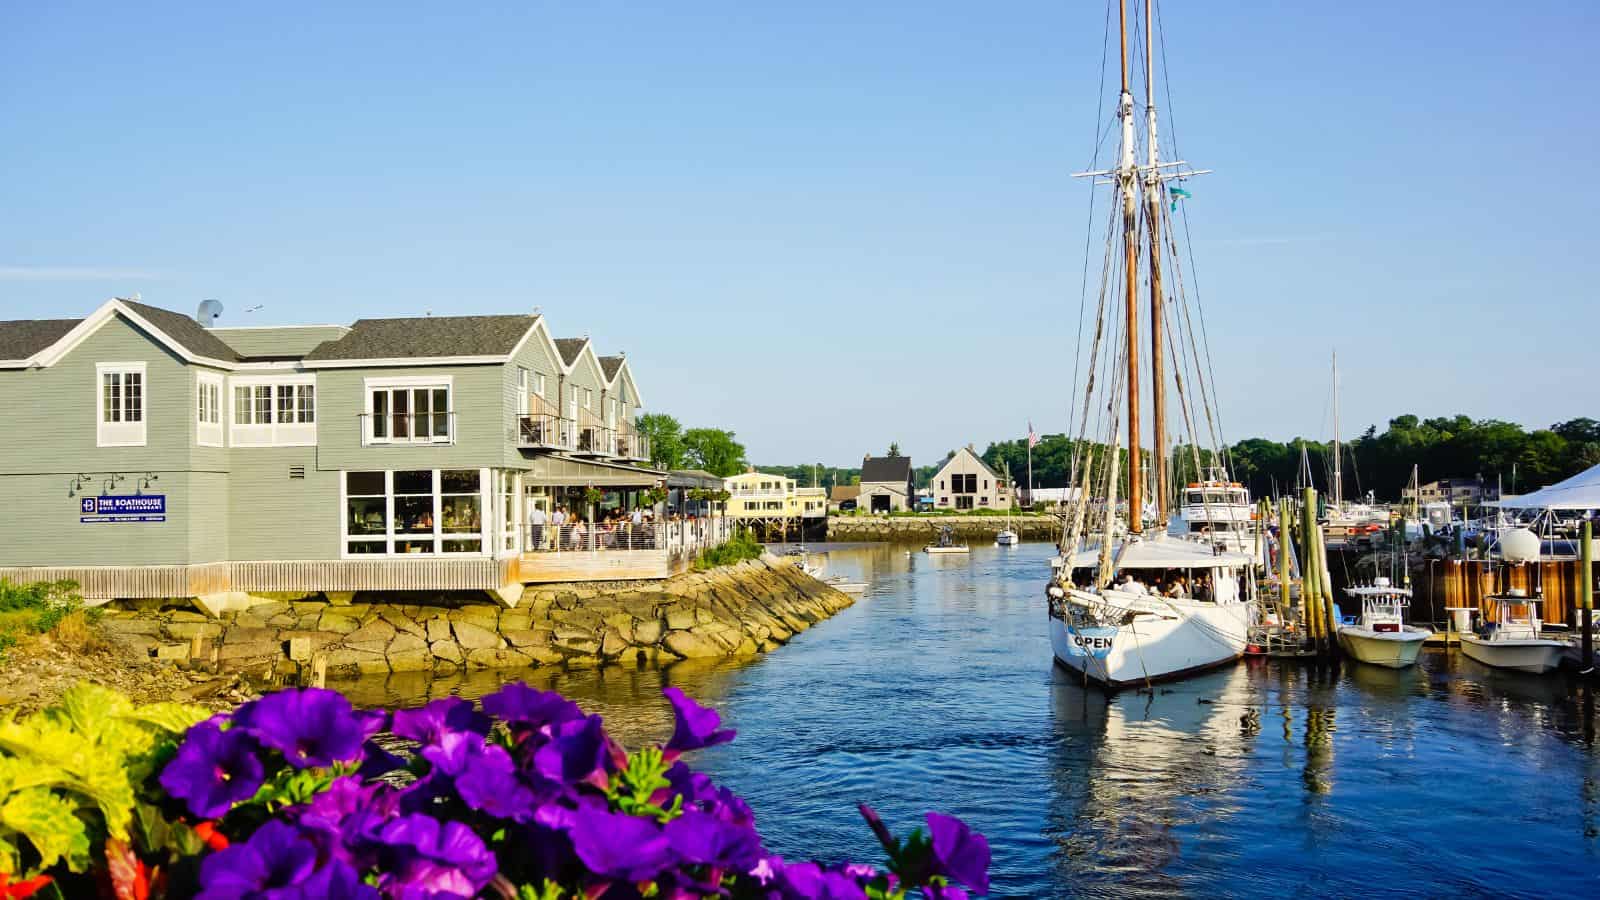 <p>Kennebunkport is a display of small-town quirk at its finest. Tourists overtake the New England town in the summer, laying out at Goose Rocks Beach, taking in views of the Goat Island Lighthouse, and heading out to sea for whale watching and sailing.</p><p>Dining is all about fresh Maine seafood—specifically lobster. For some of the best, head to Alisson’s Restaurant for lobster bisque and lobster rolls, a Kennebunkport favorite since 1973.</p>